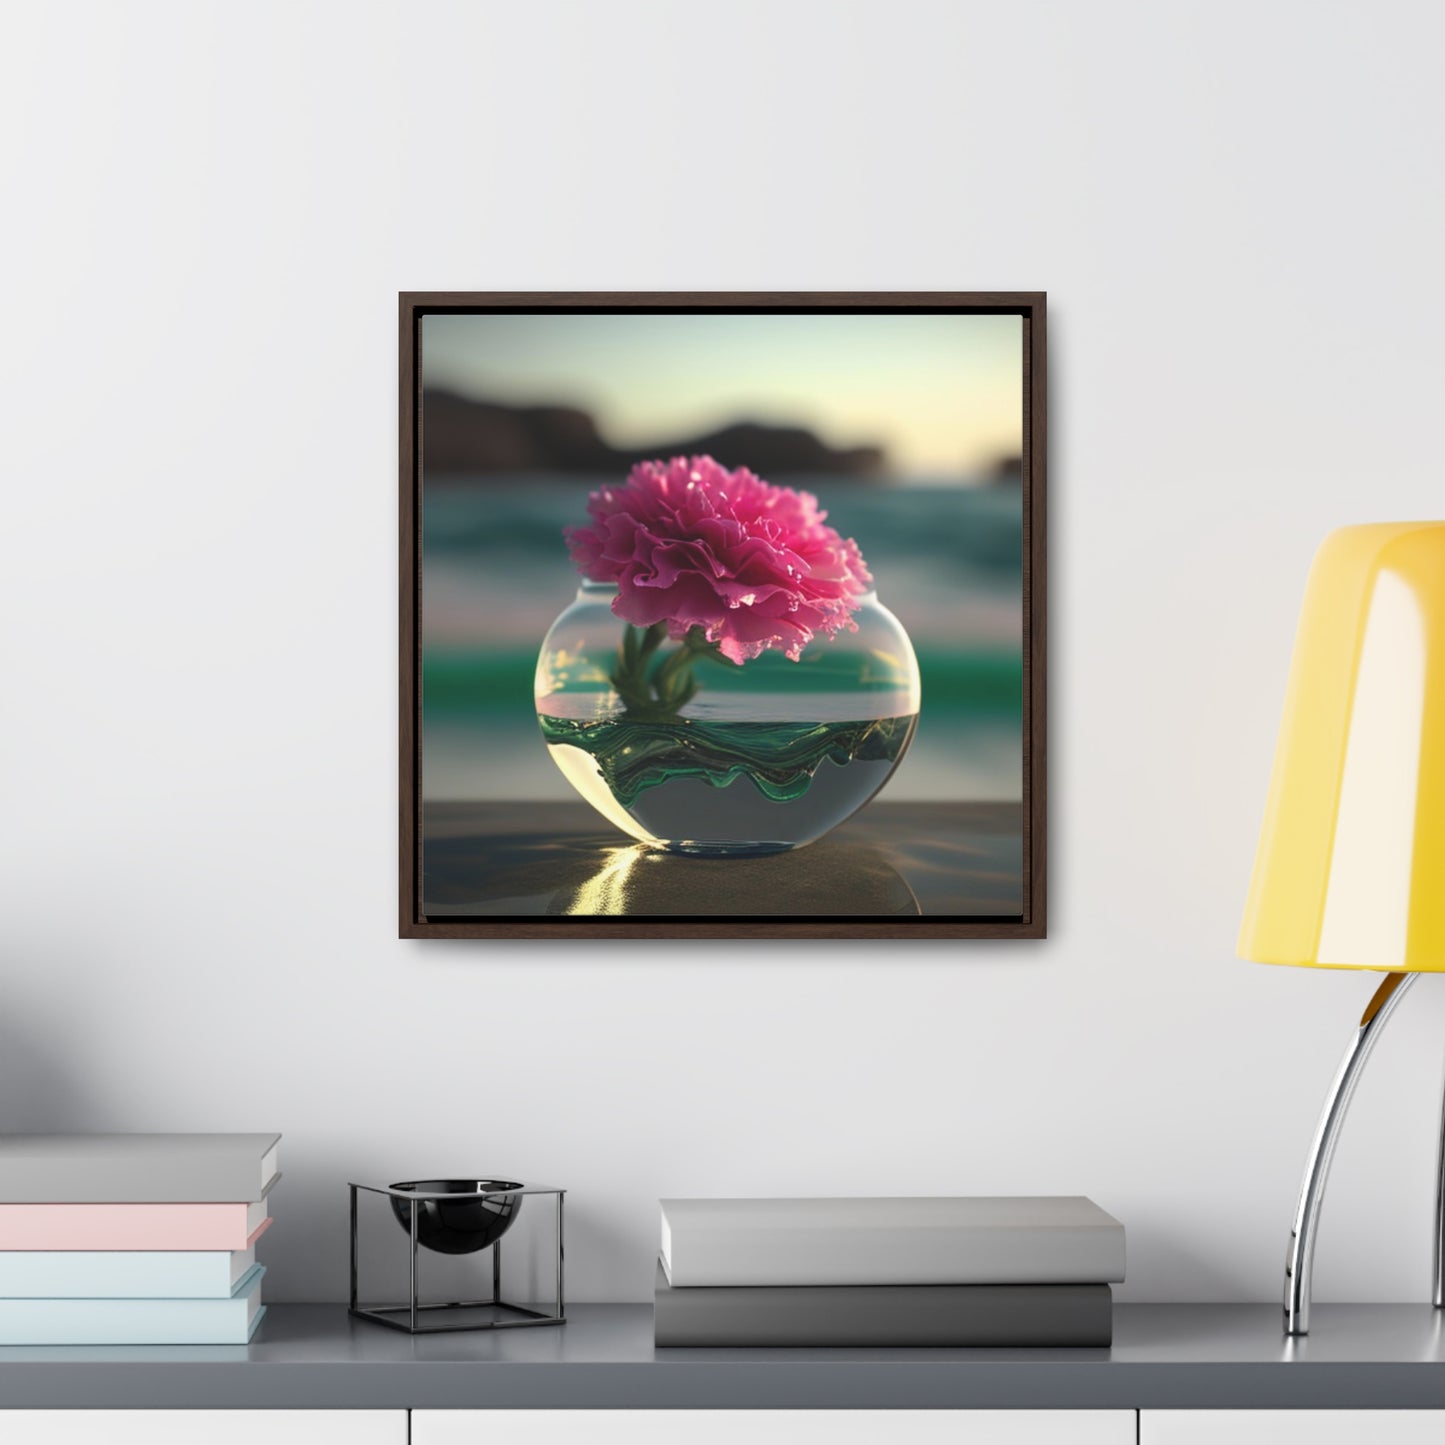 Gallery Canvas Wraps, Square Frame Carnation 3